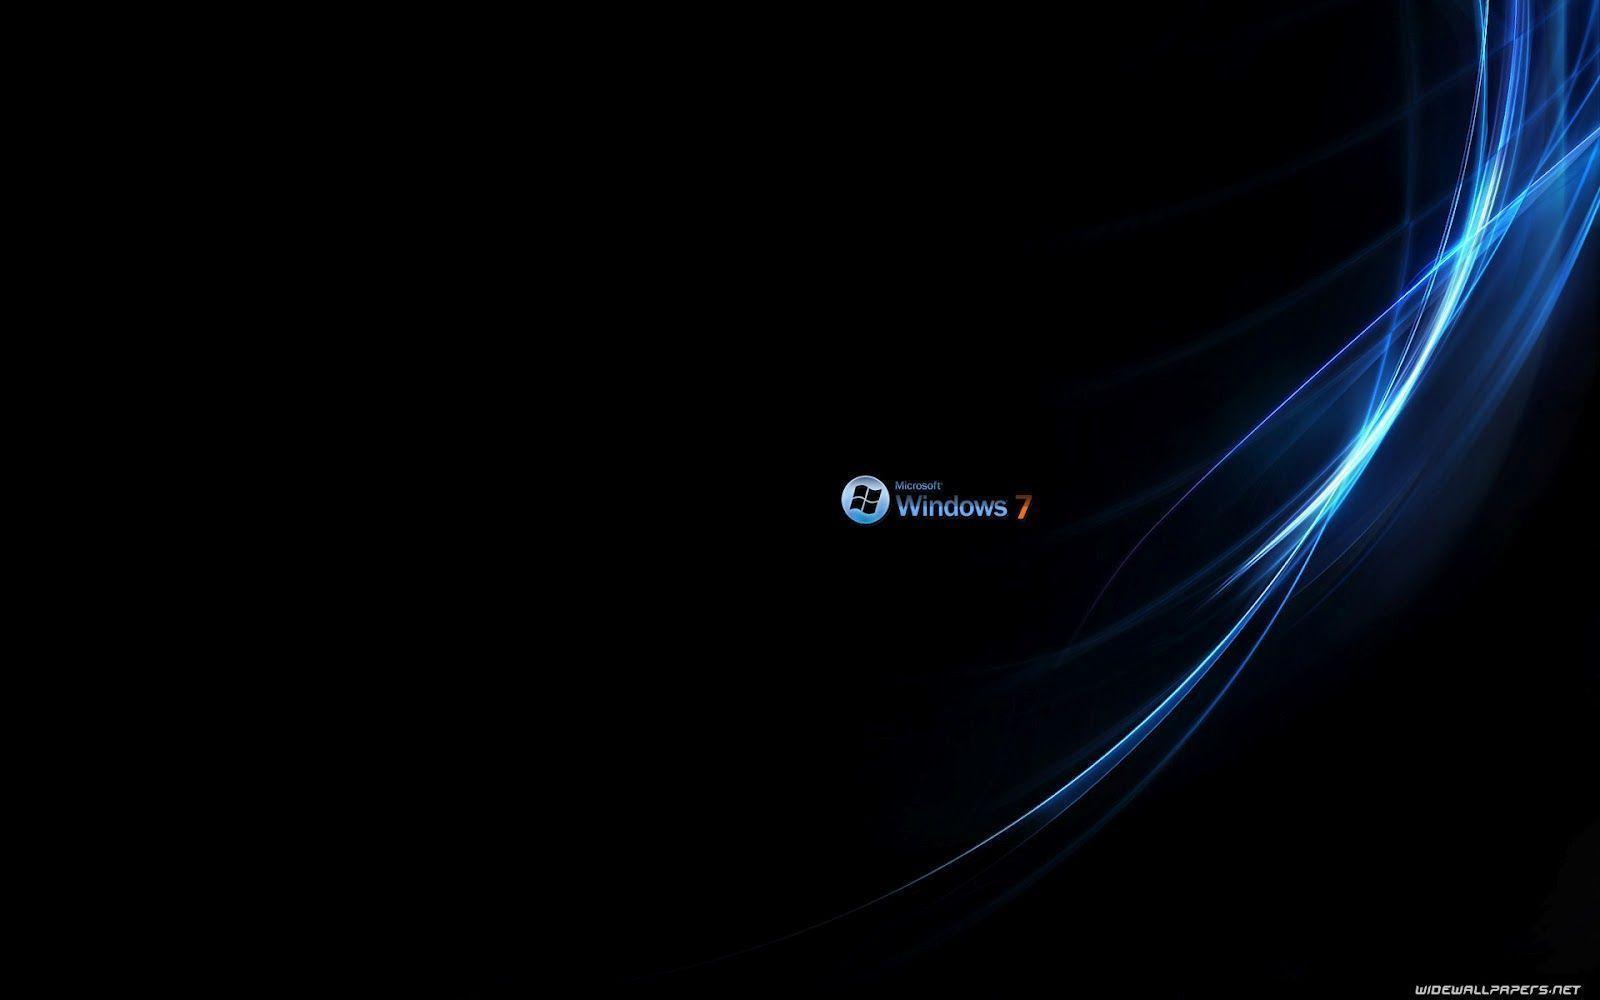 Windows 7 Live Wallpaper and Background